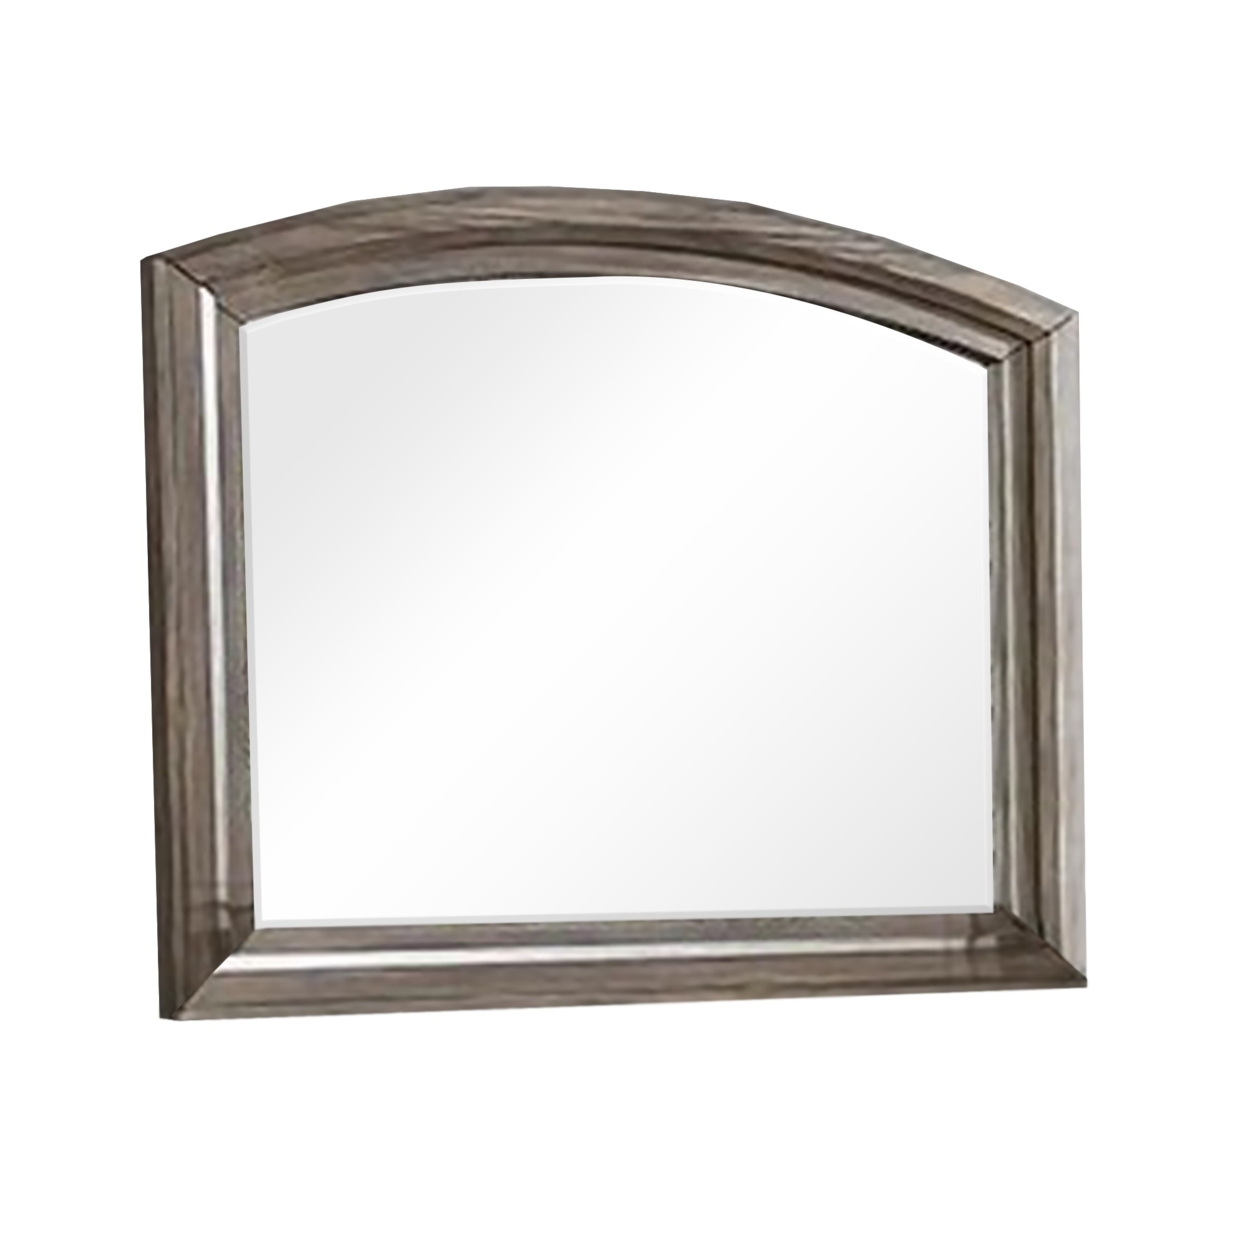 Wall Mirror With Plank Style Wooden Frame And Arched Top, Brown- Saltoro Sherpi